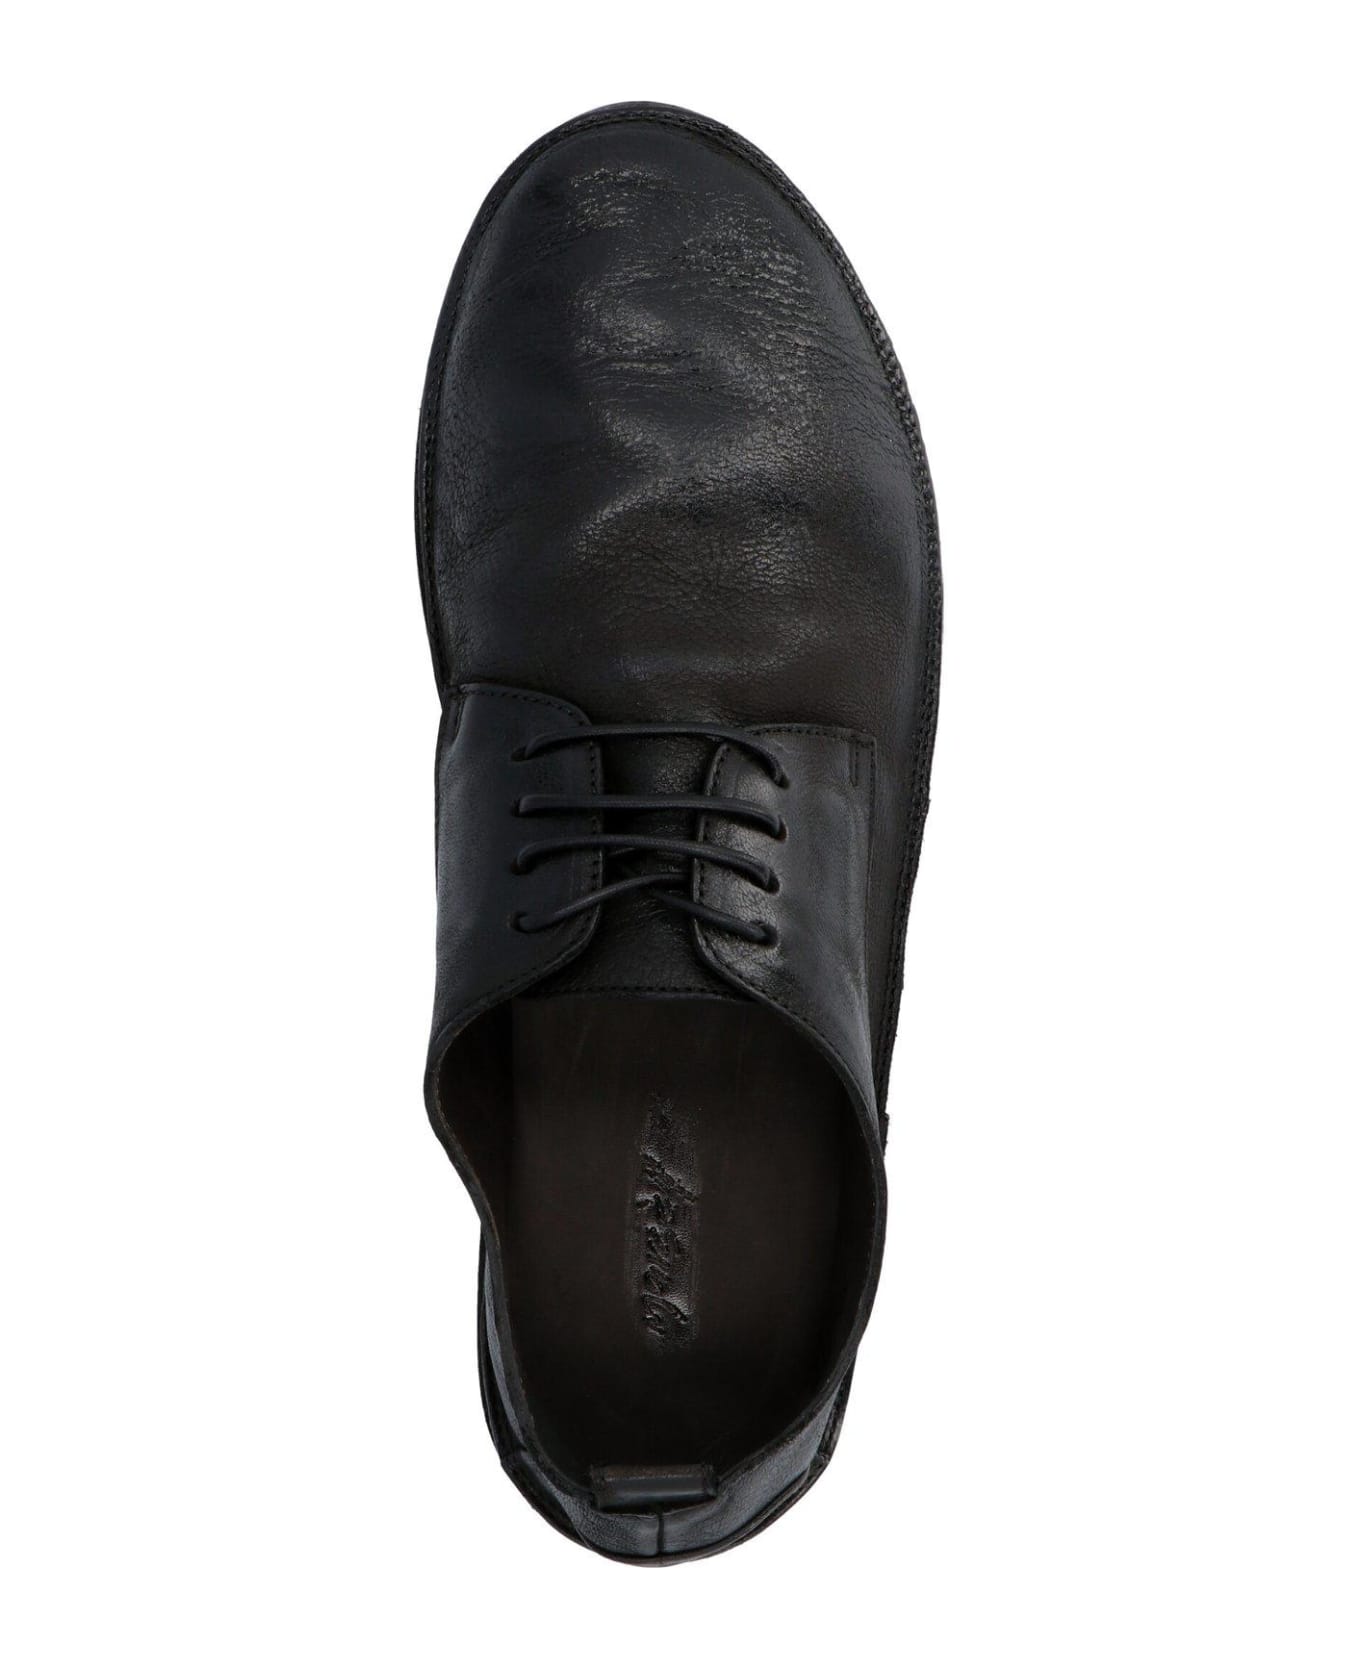 Marsell Strasacco Lace-up Shoes - BLACK ローファー＆デッキシューズ